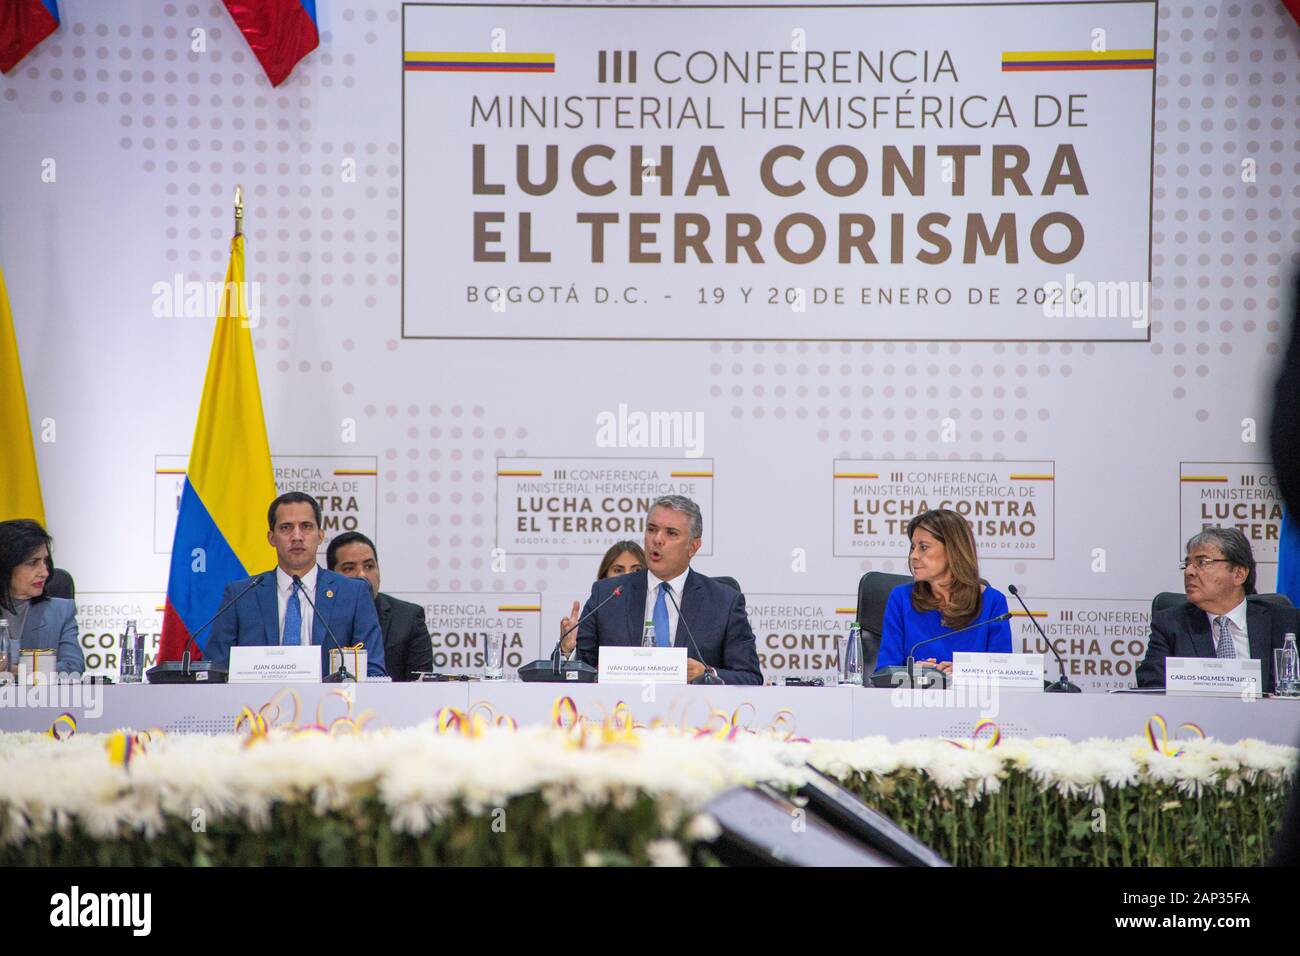 Leaders, from left, Venezuela's opposition leader Juan Guaido, Colombia's President Ivan Duque, his Vice President Marta Lucia Ramirez and Colombia's Stock Photo